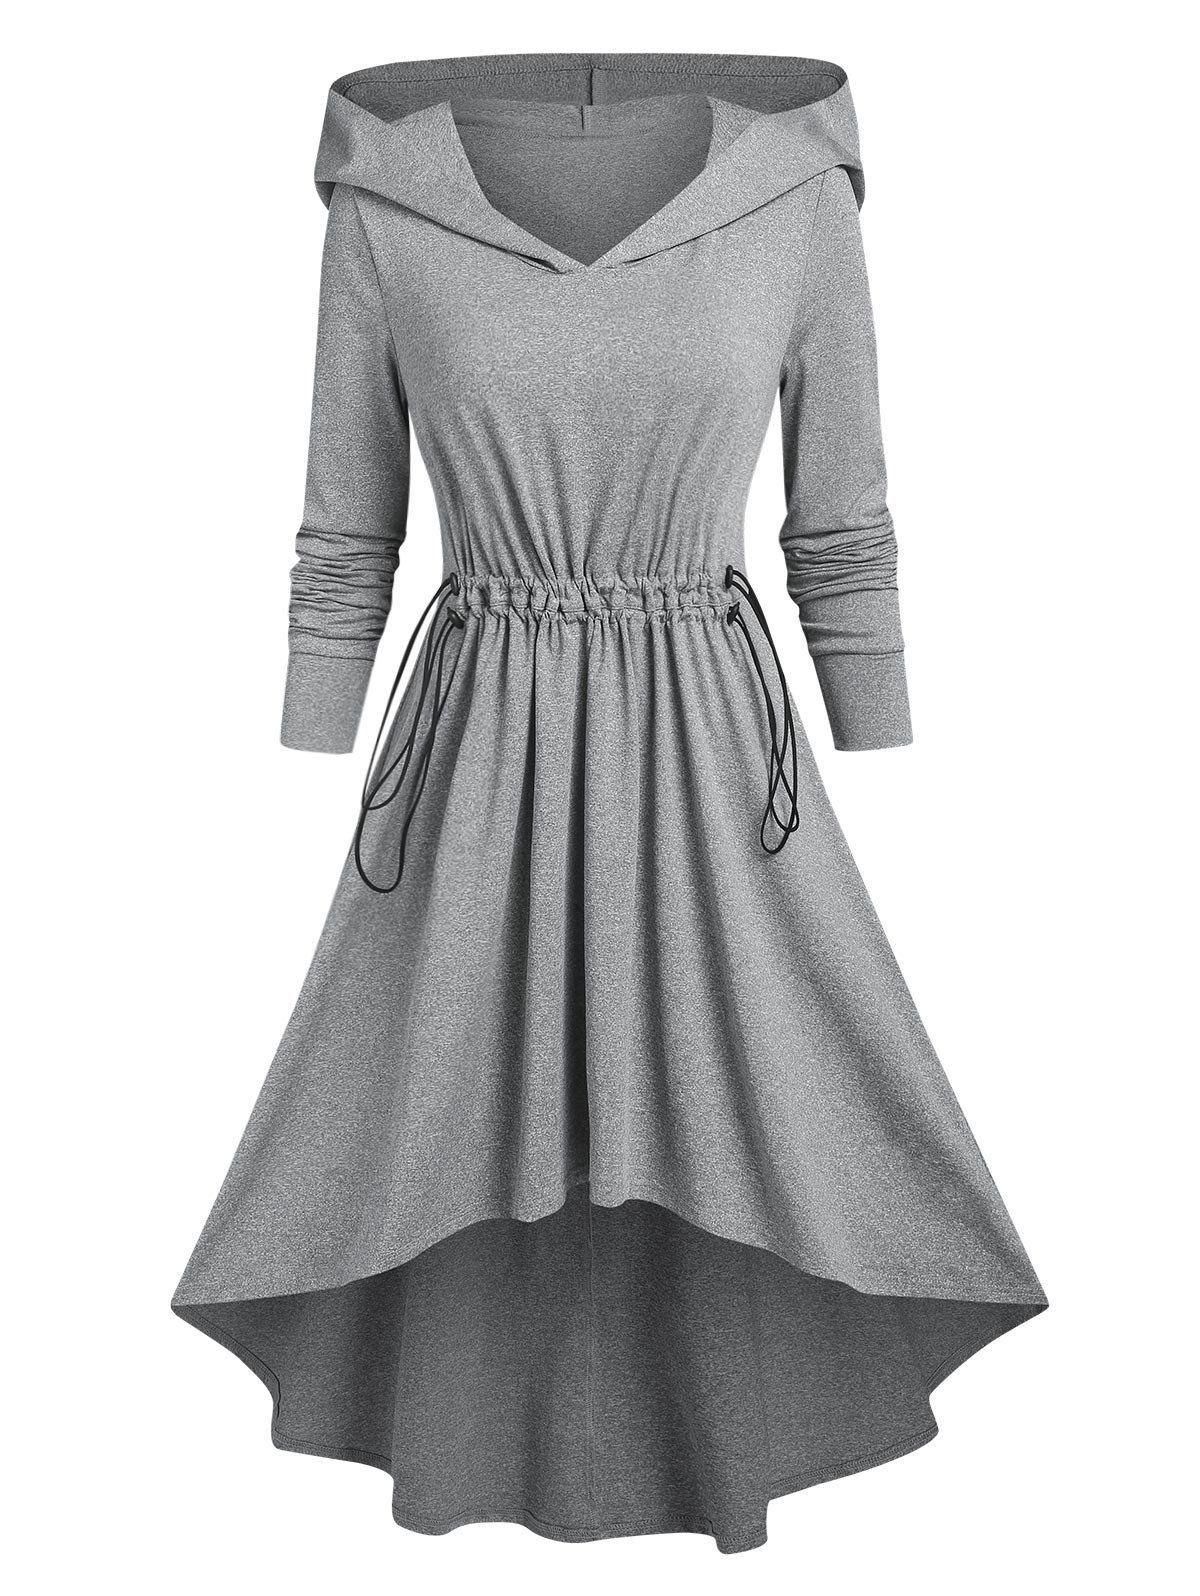 Hooded High-low Marled Dress - LIGHT GRAY L